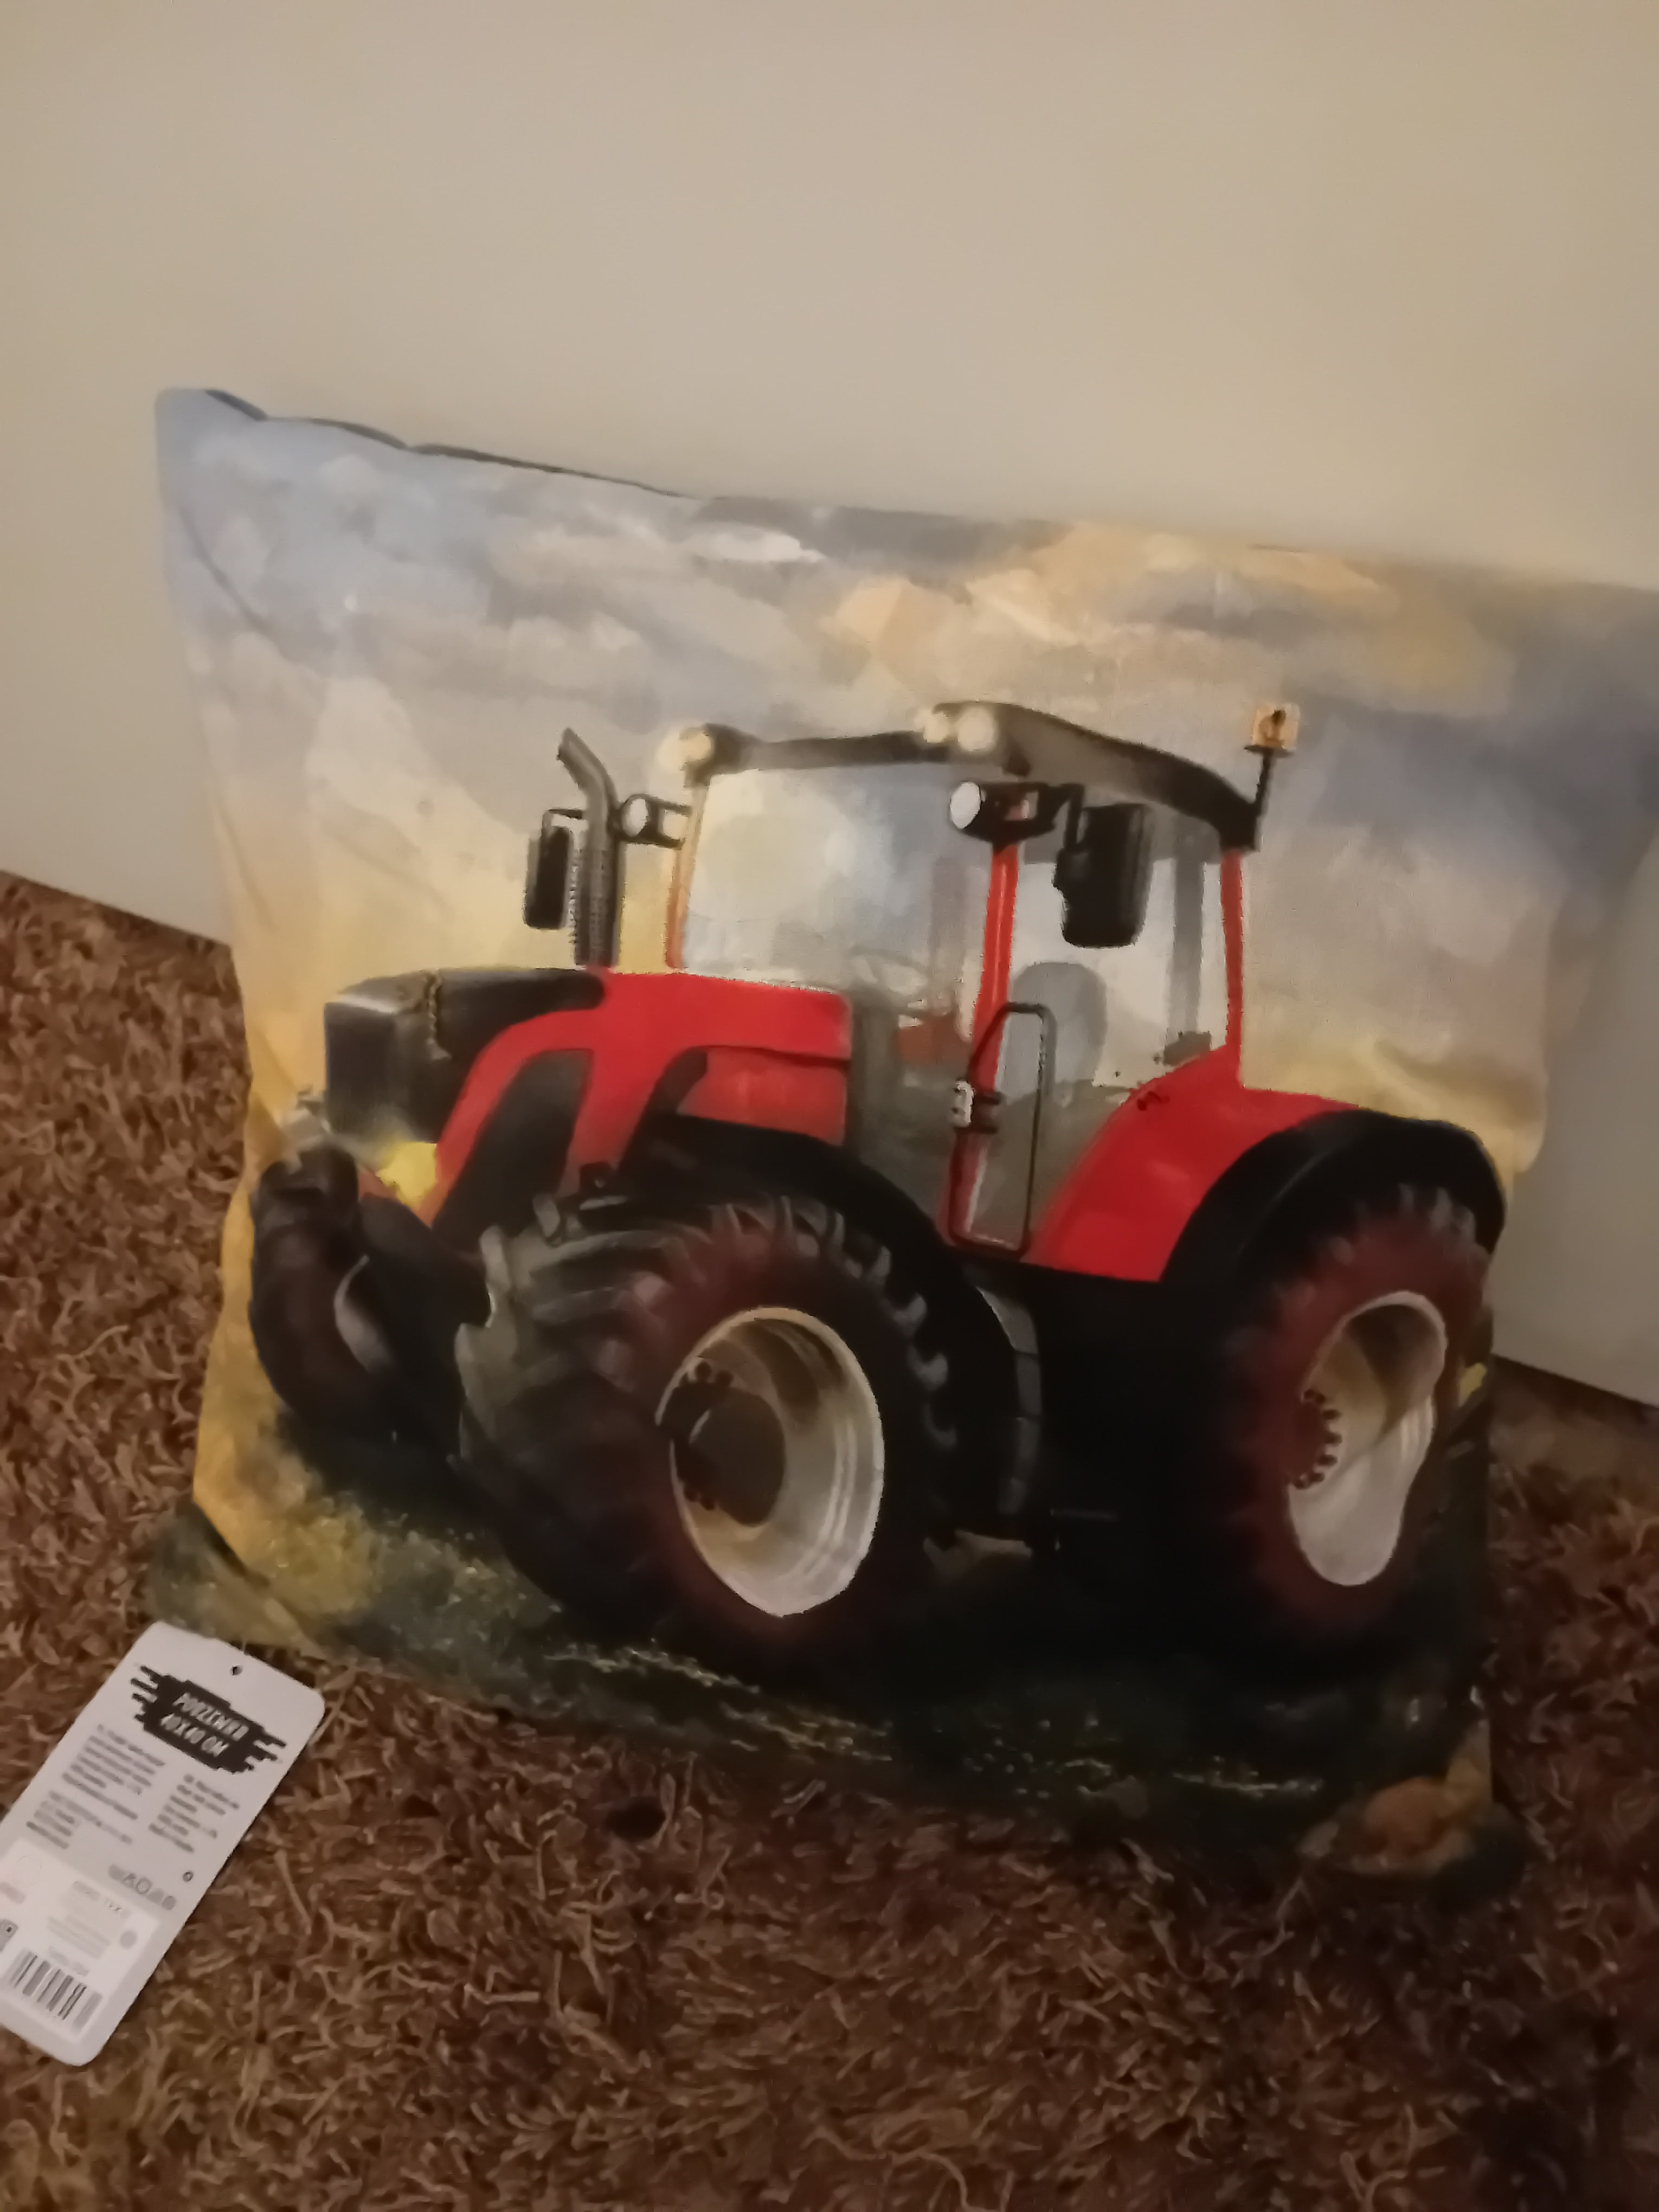 Cushion from Case